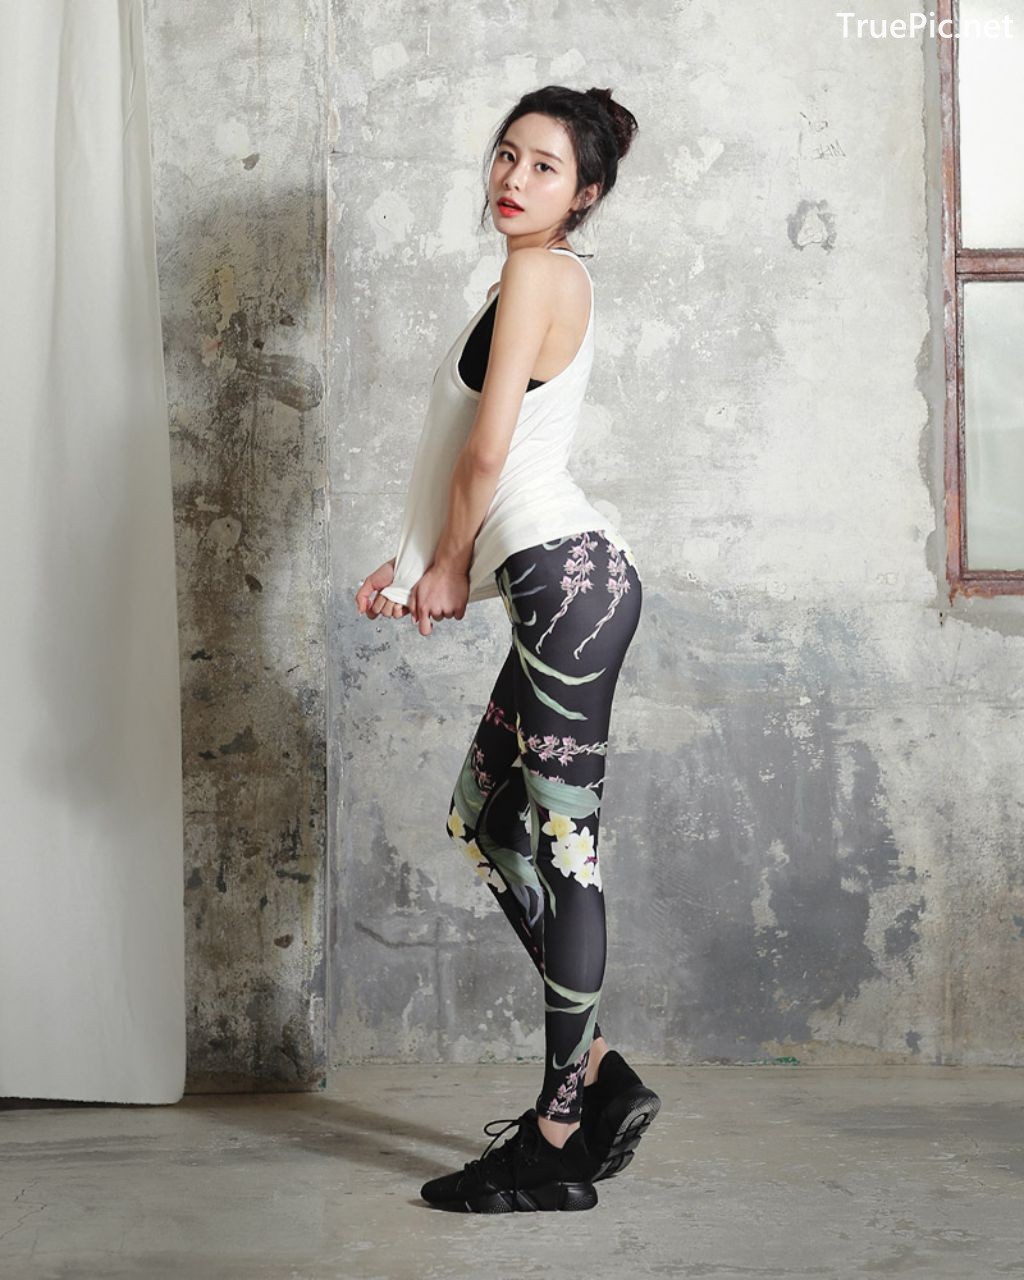 Image-Korean-Fashion-Model-Ju-Woo-Fitness-Set-Collection-TruePic.net- Picture-117